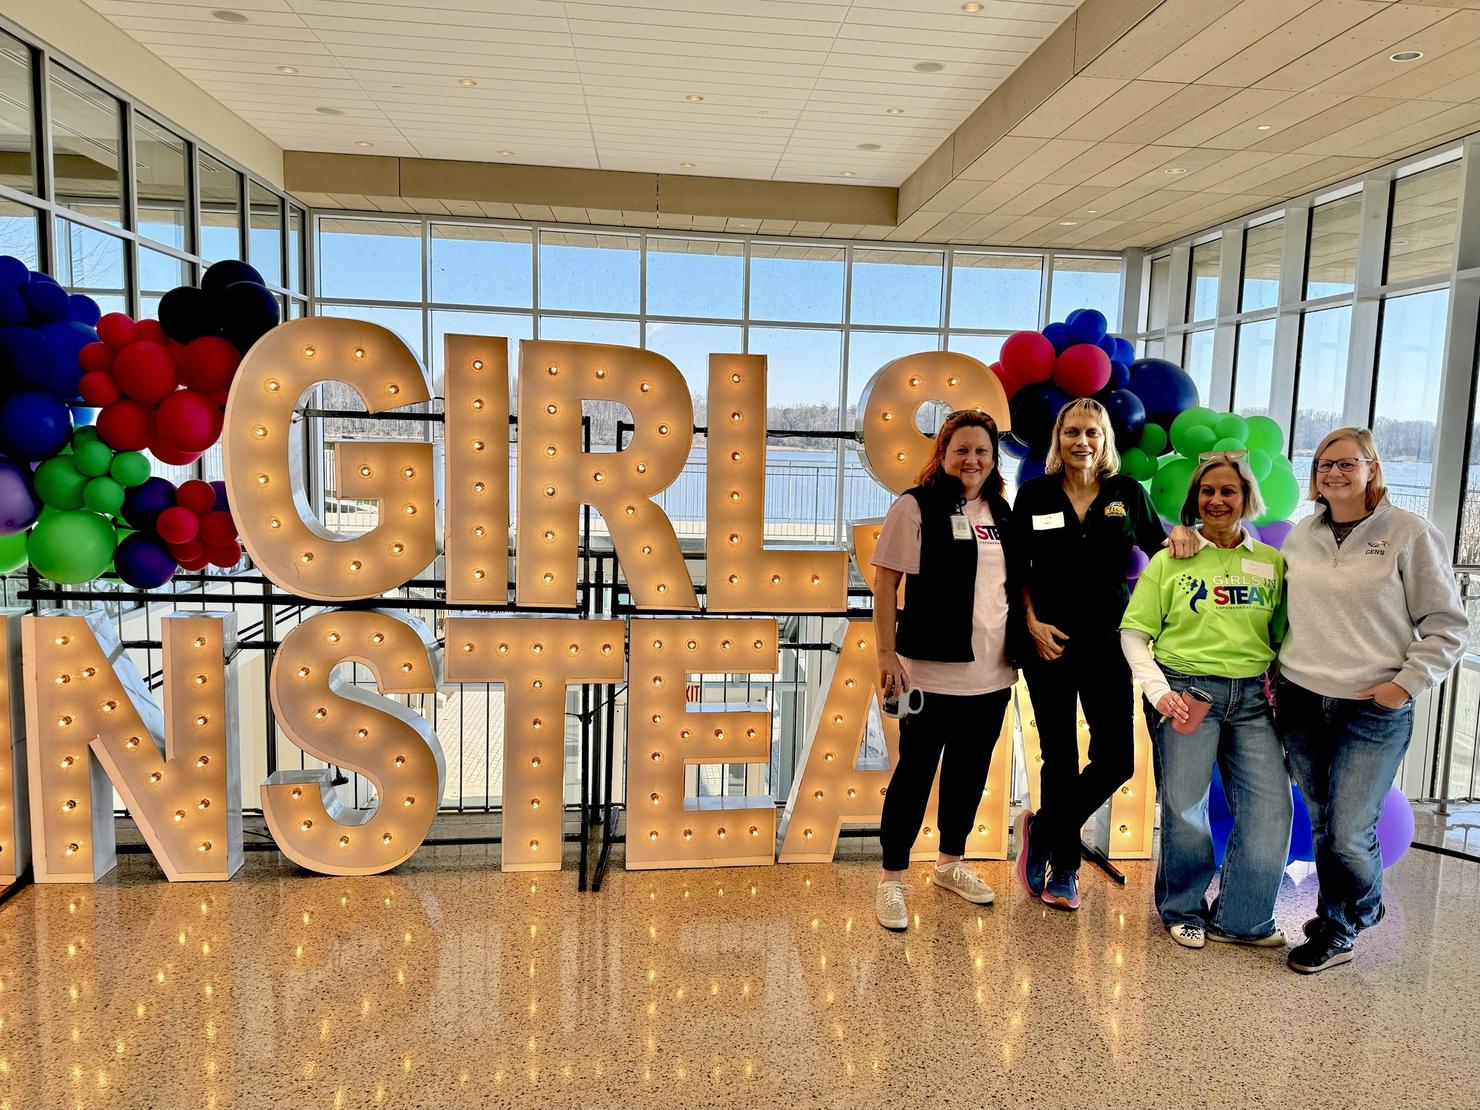 Event organizers in front of the decorative sign that says GIRLS IN STEAM